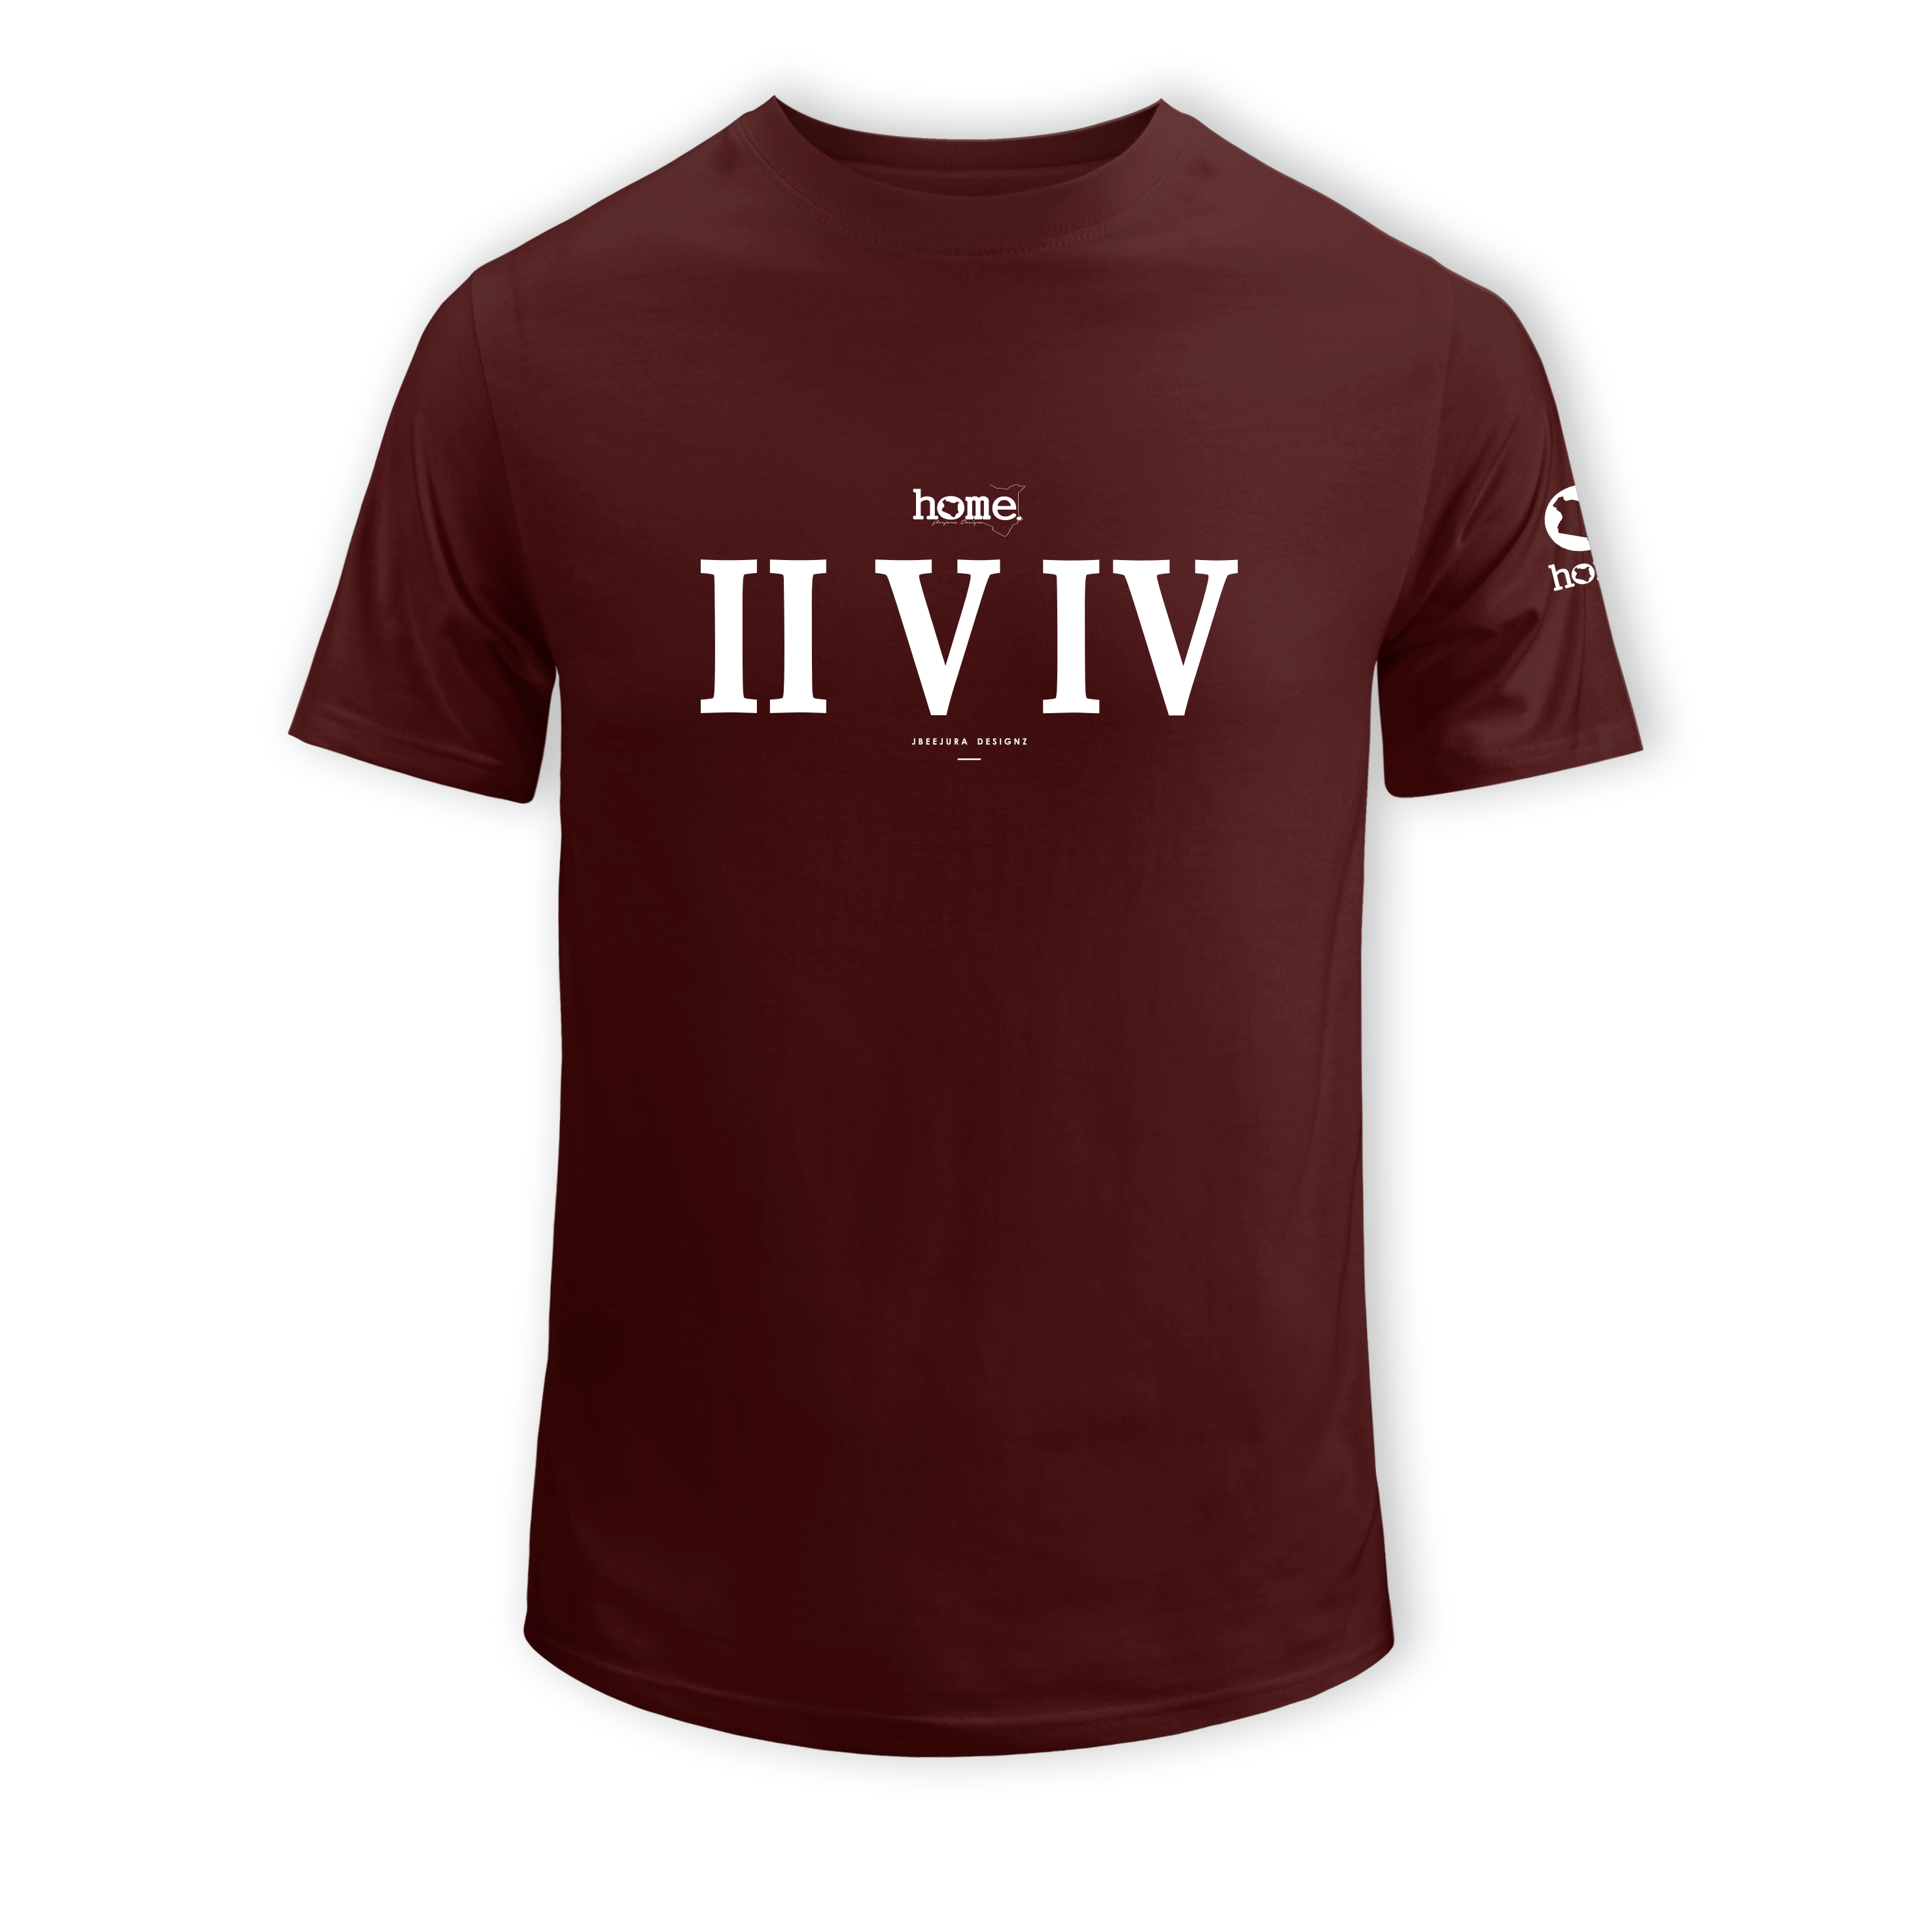 home_254 SHORT-SLEEVED MAROON T-SHIRT WITH A WHITE ROMAN PRINT – COTTON PLUS FABRIC